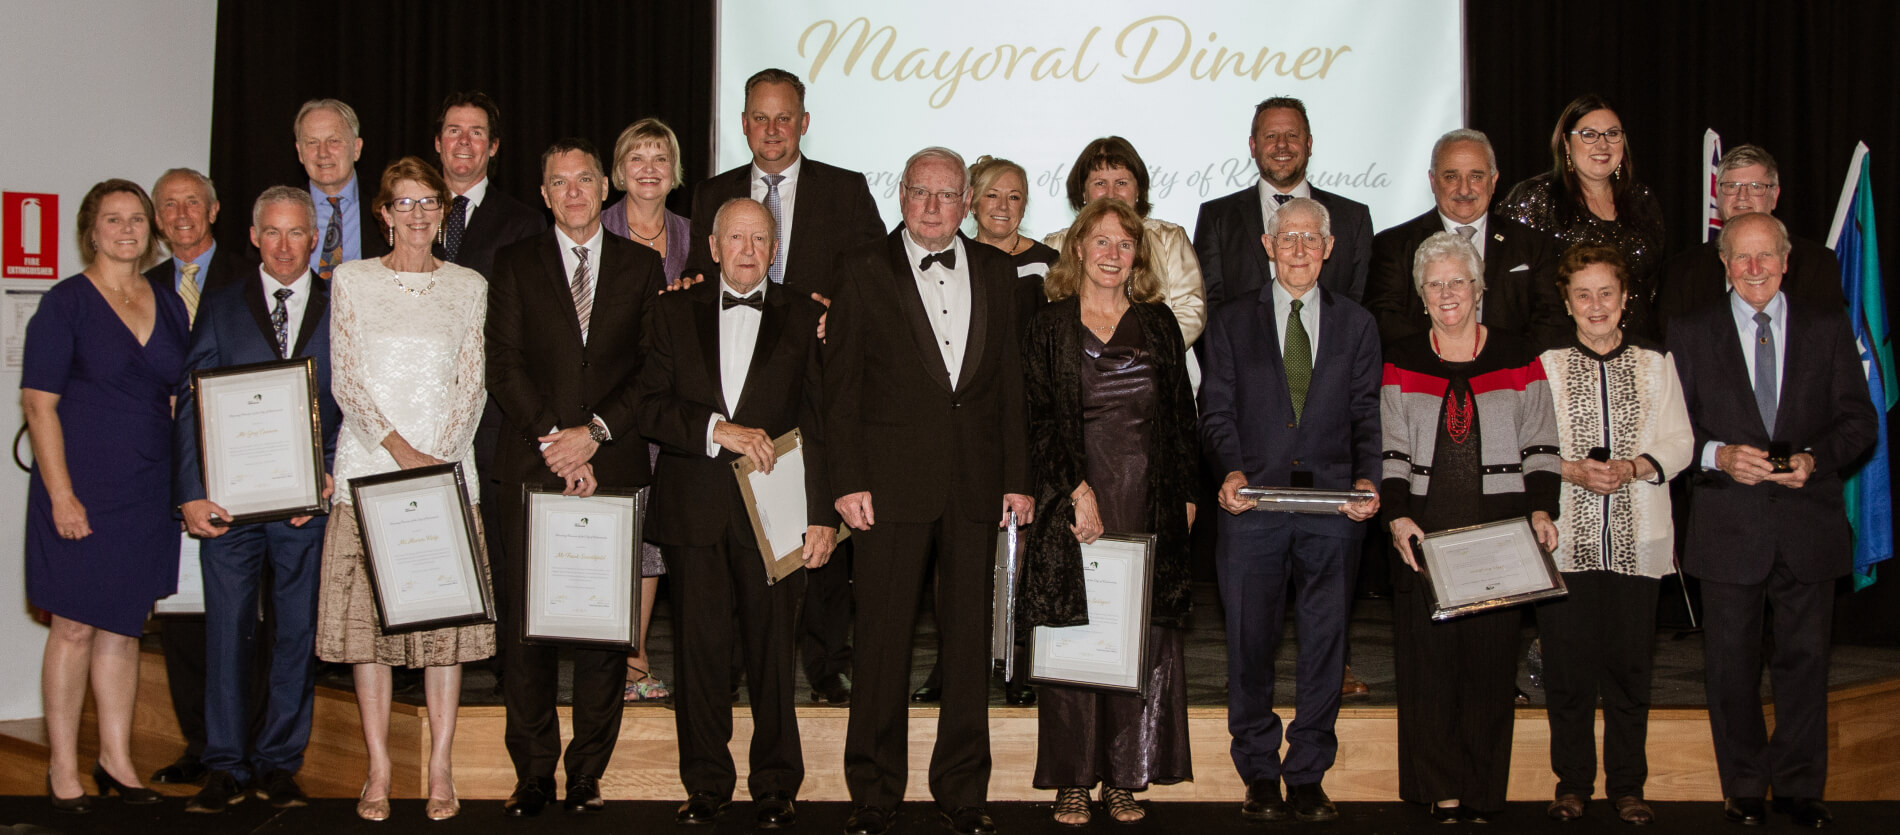 2019 recipients included Iris Jones, Thomas Hogg, Chris Saligari, Donald McKechnie, Gordon Masters, Frank Scardifield, Marian Rolfe, Mike Robinson, Noreen Townsend and Greg Cannon. Second row are elected council members